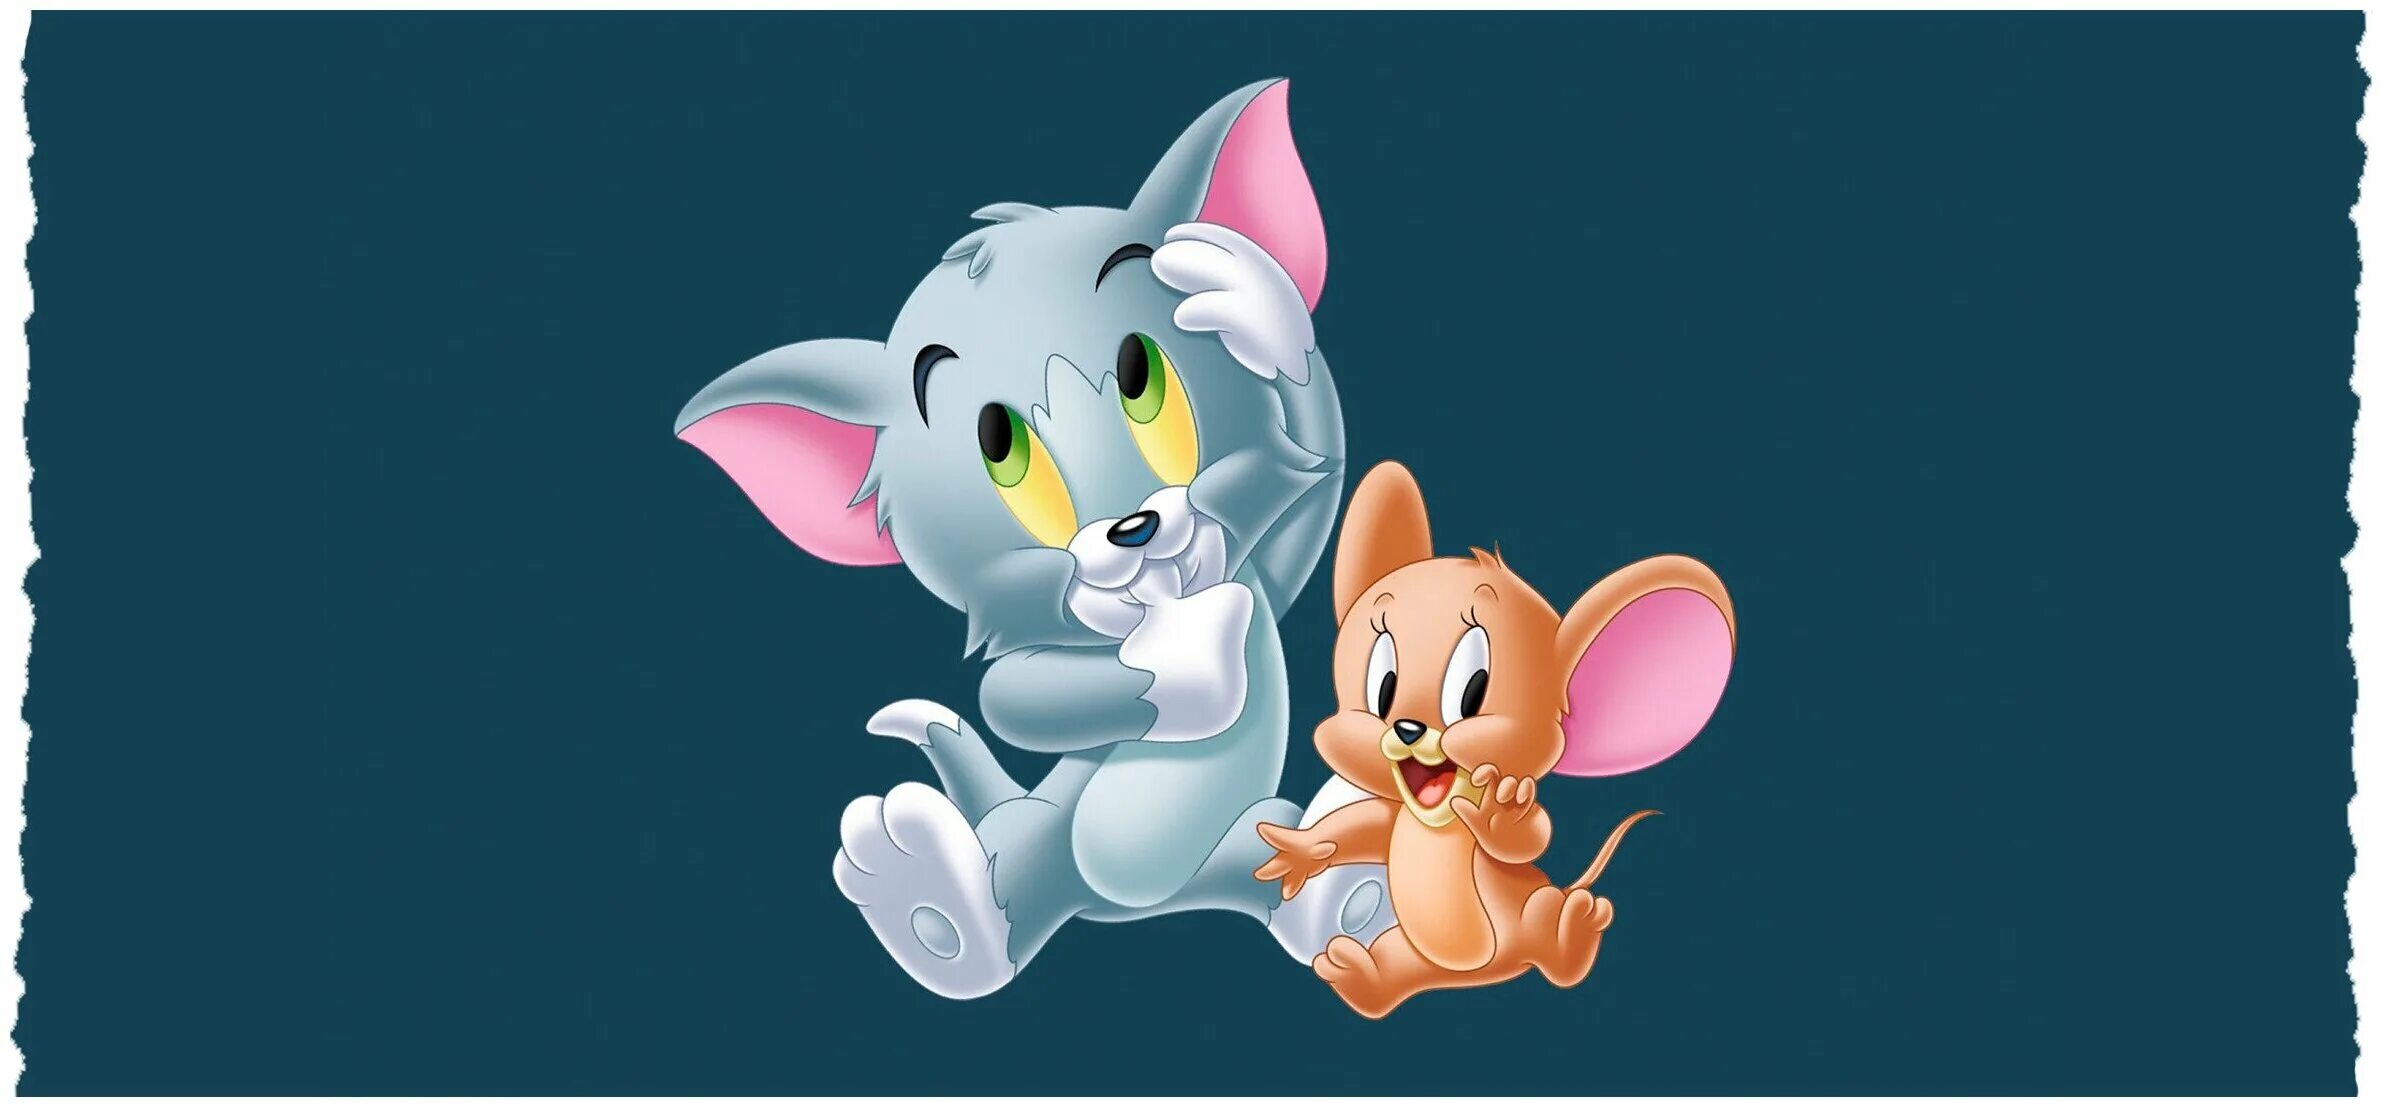 Baby tom. Tom and Jerry. Мультяшки. Обои мультяшки. Обои на рабочий стол мультяшки.